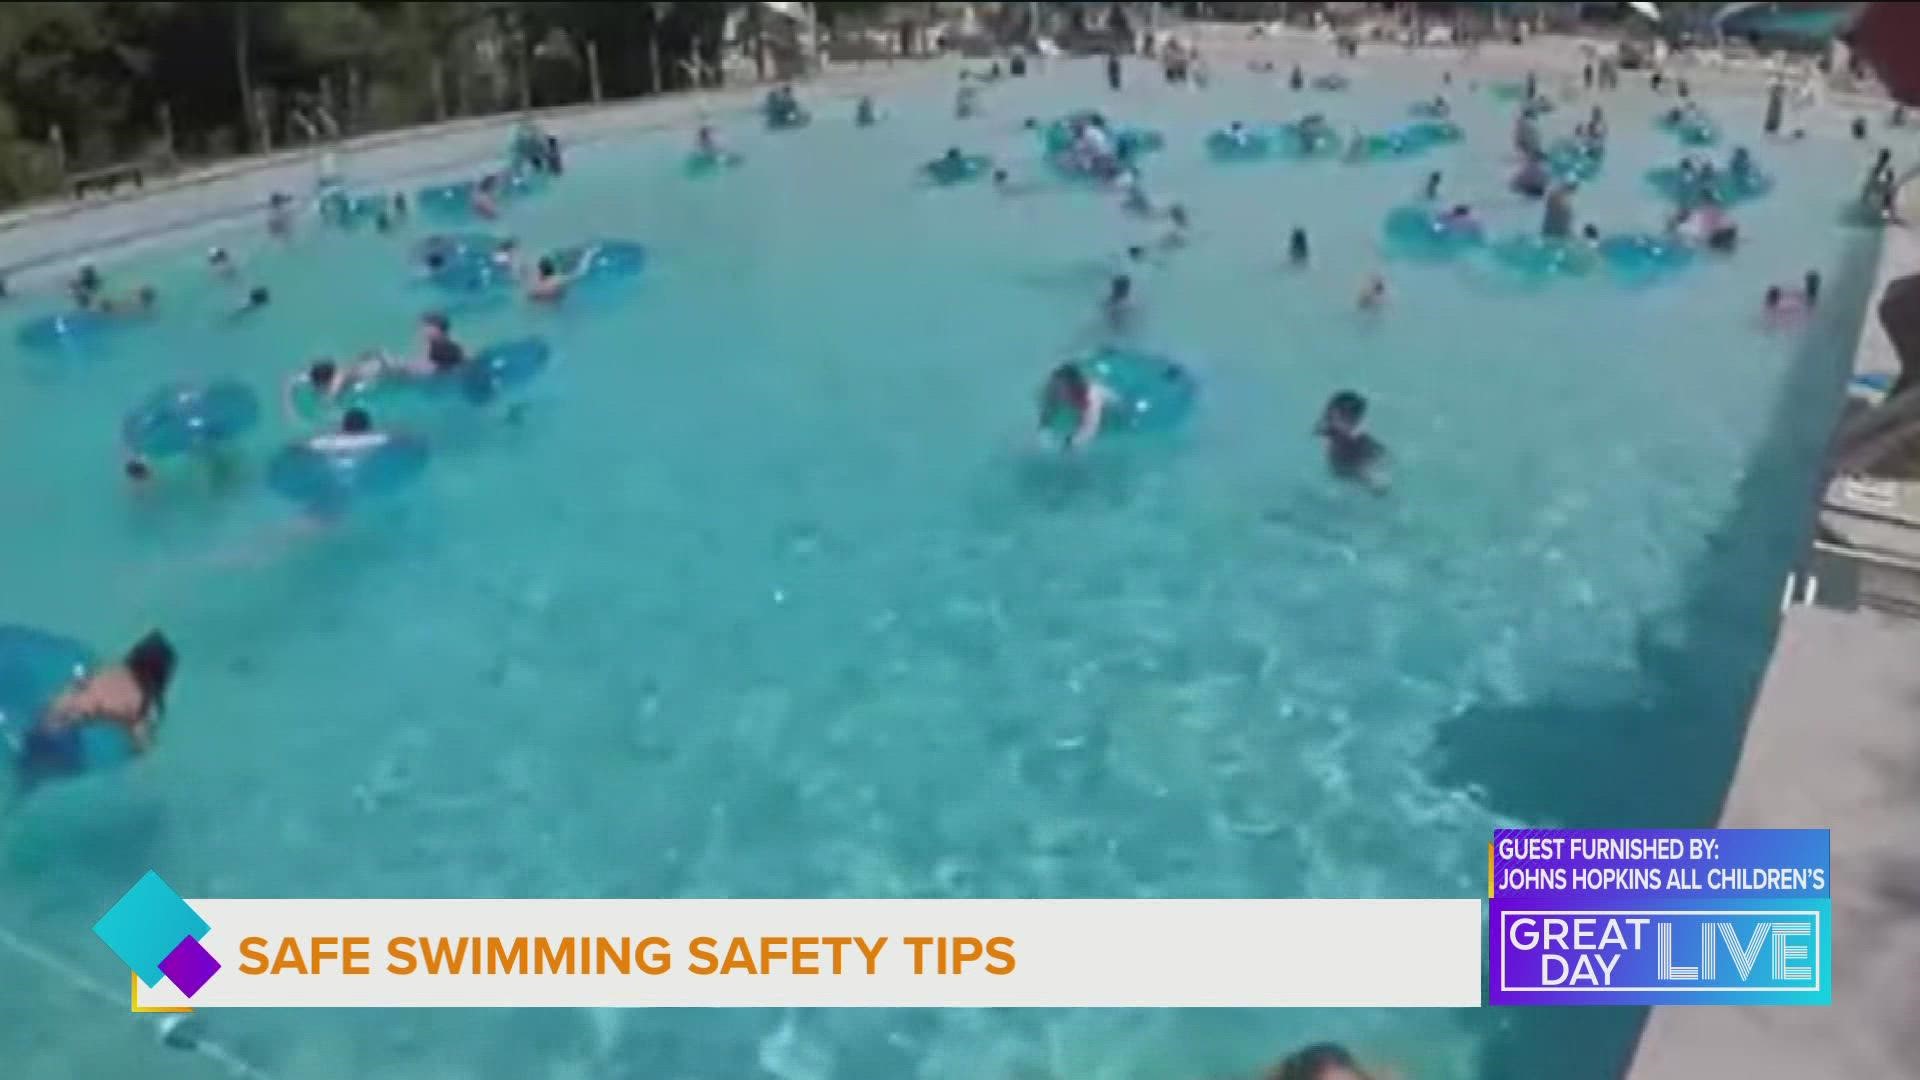 GDL gets safety tips from John’s Hopkins All Children’s hospital to stay safe this summer when it comes to keeping kids safe around water.